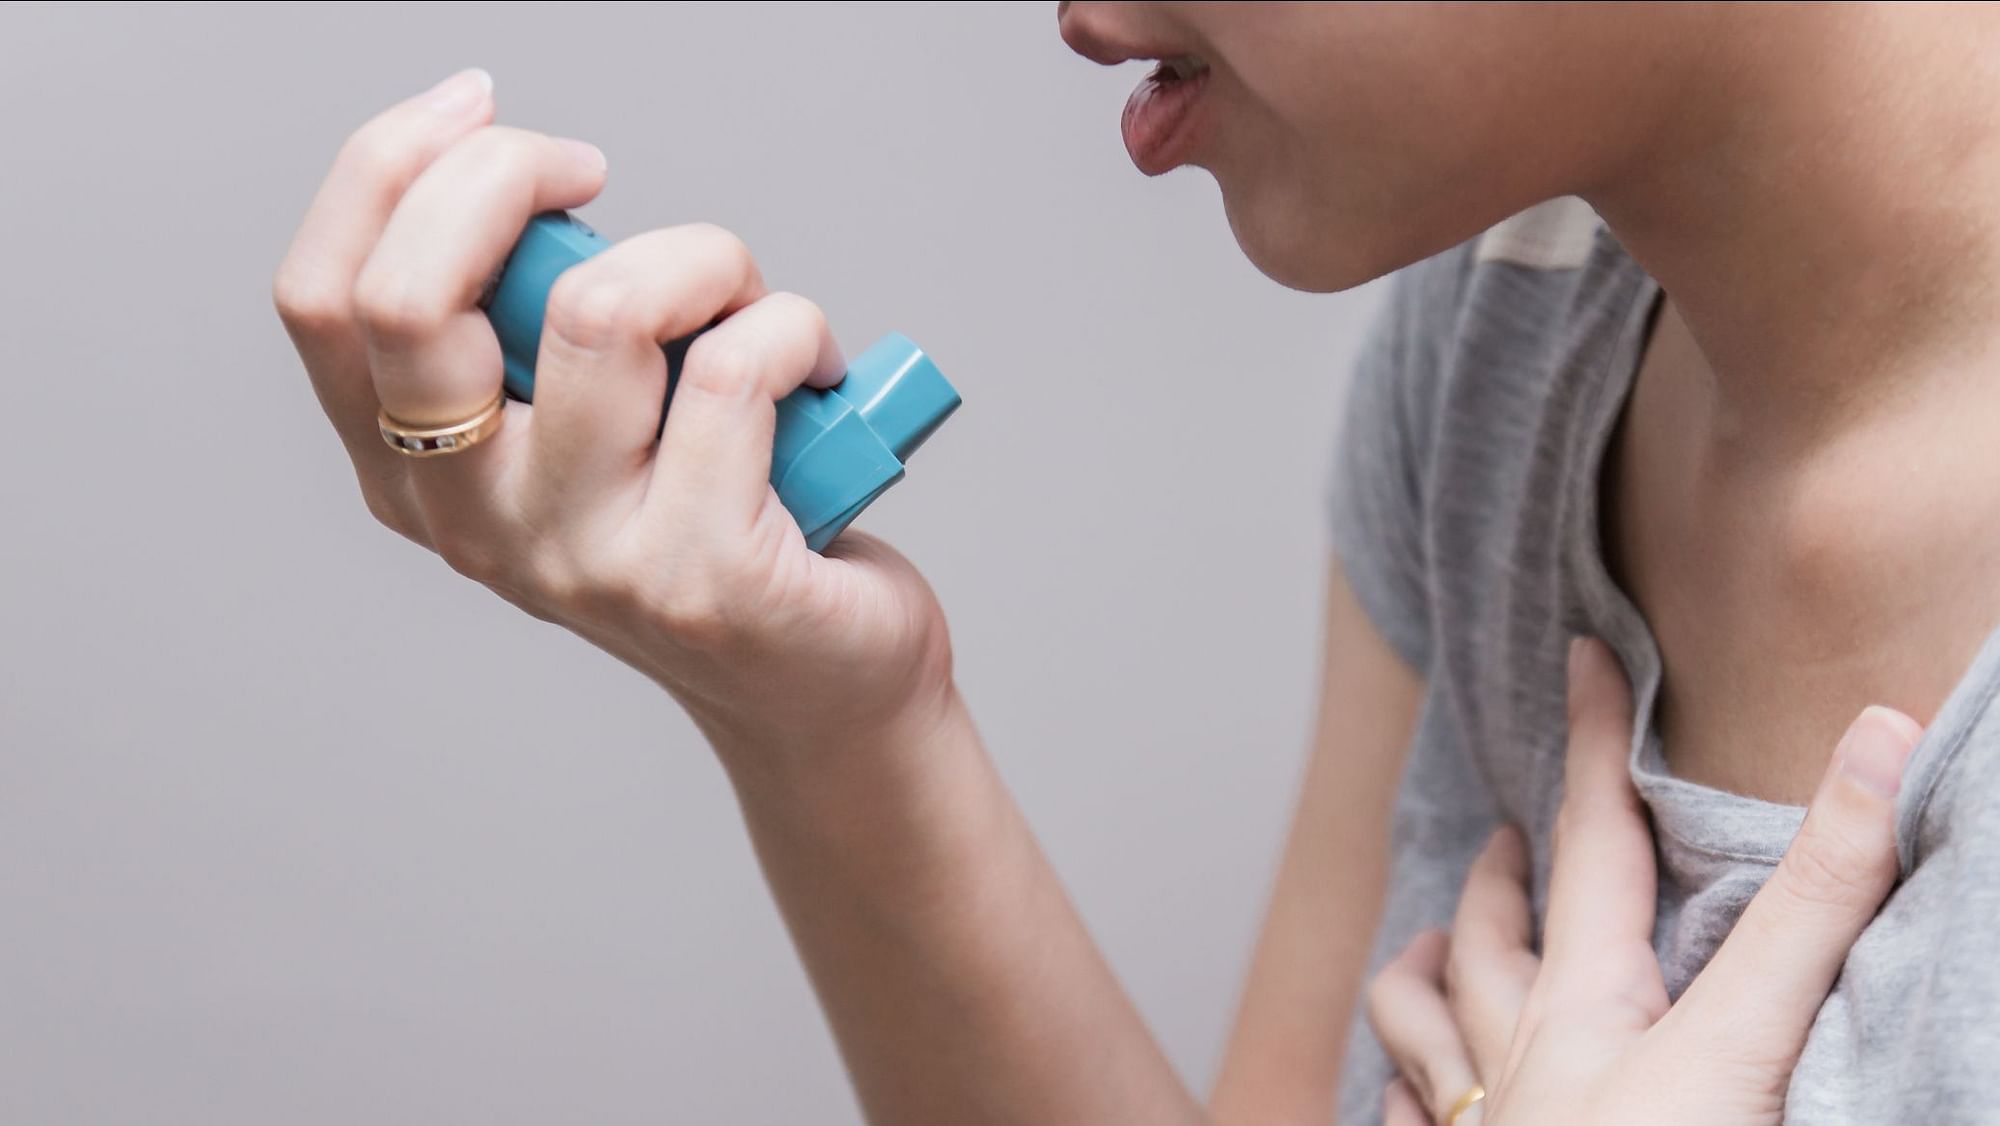 The WHO estimates that 235 million people around the world suffer from asthma.